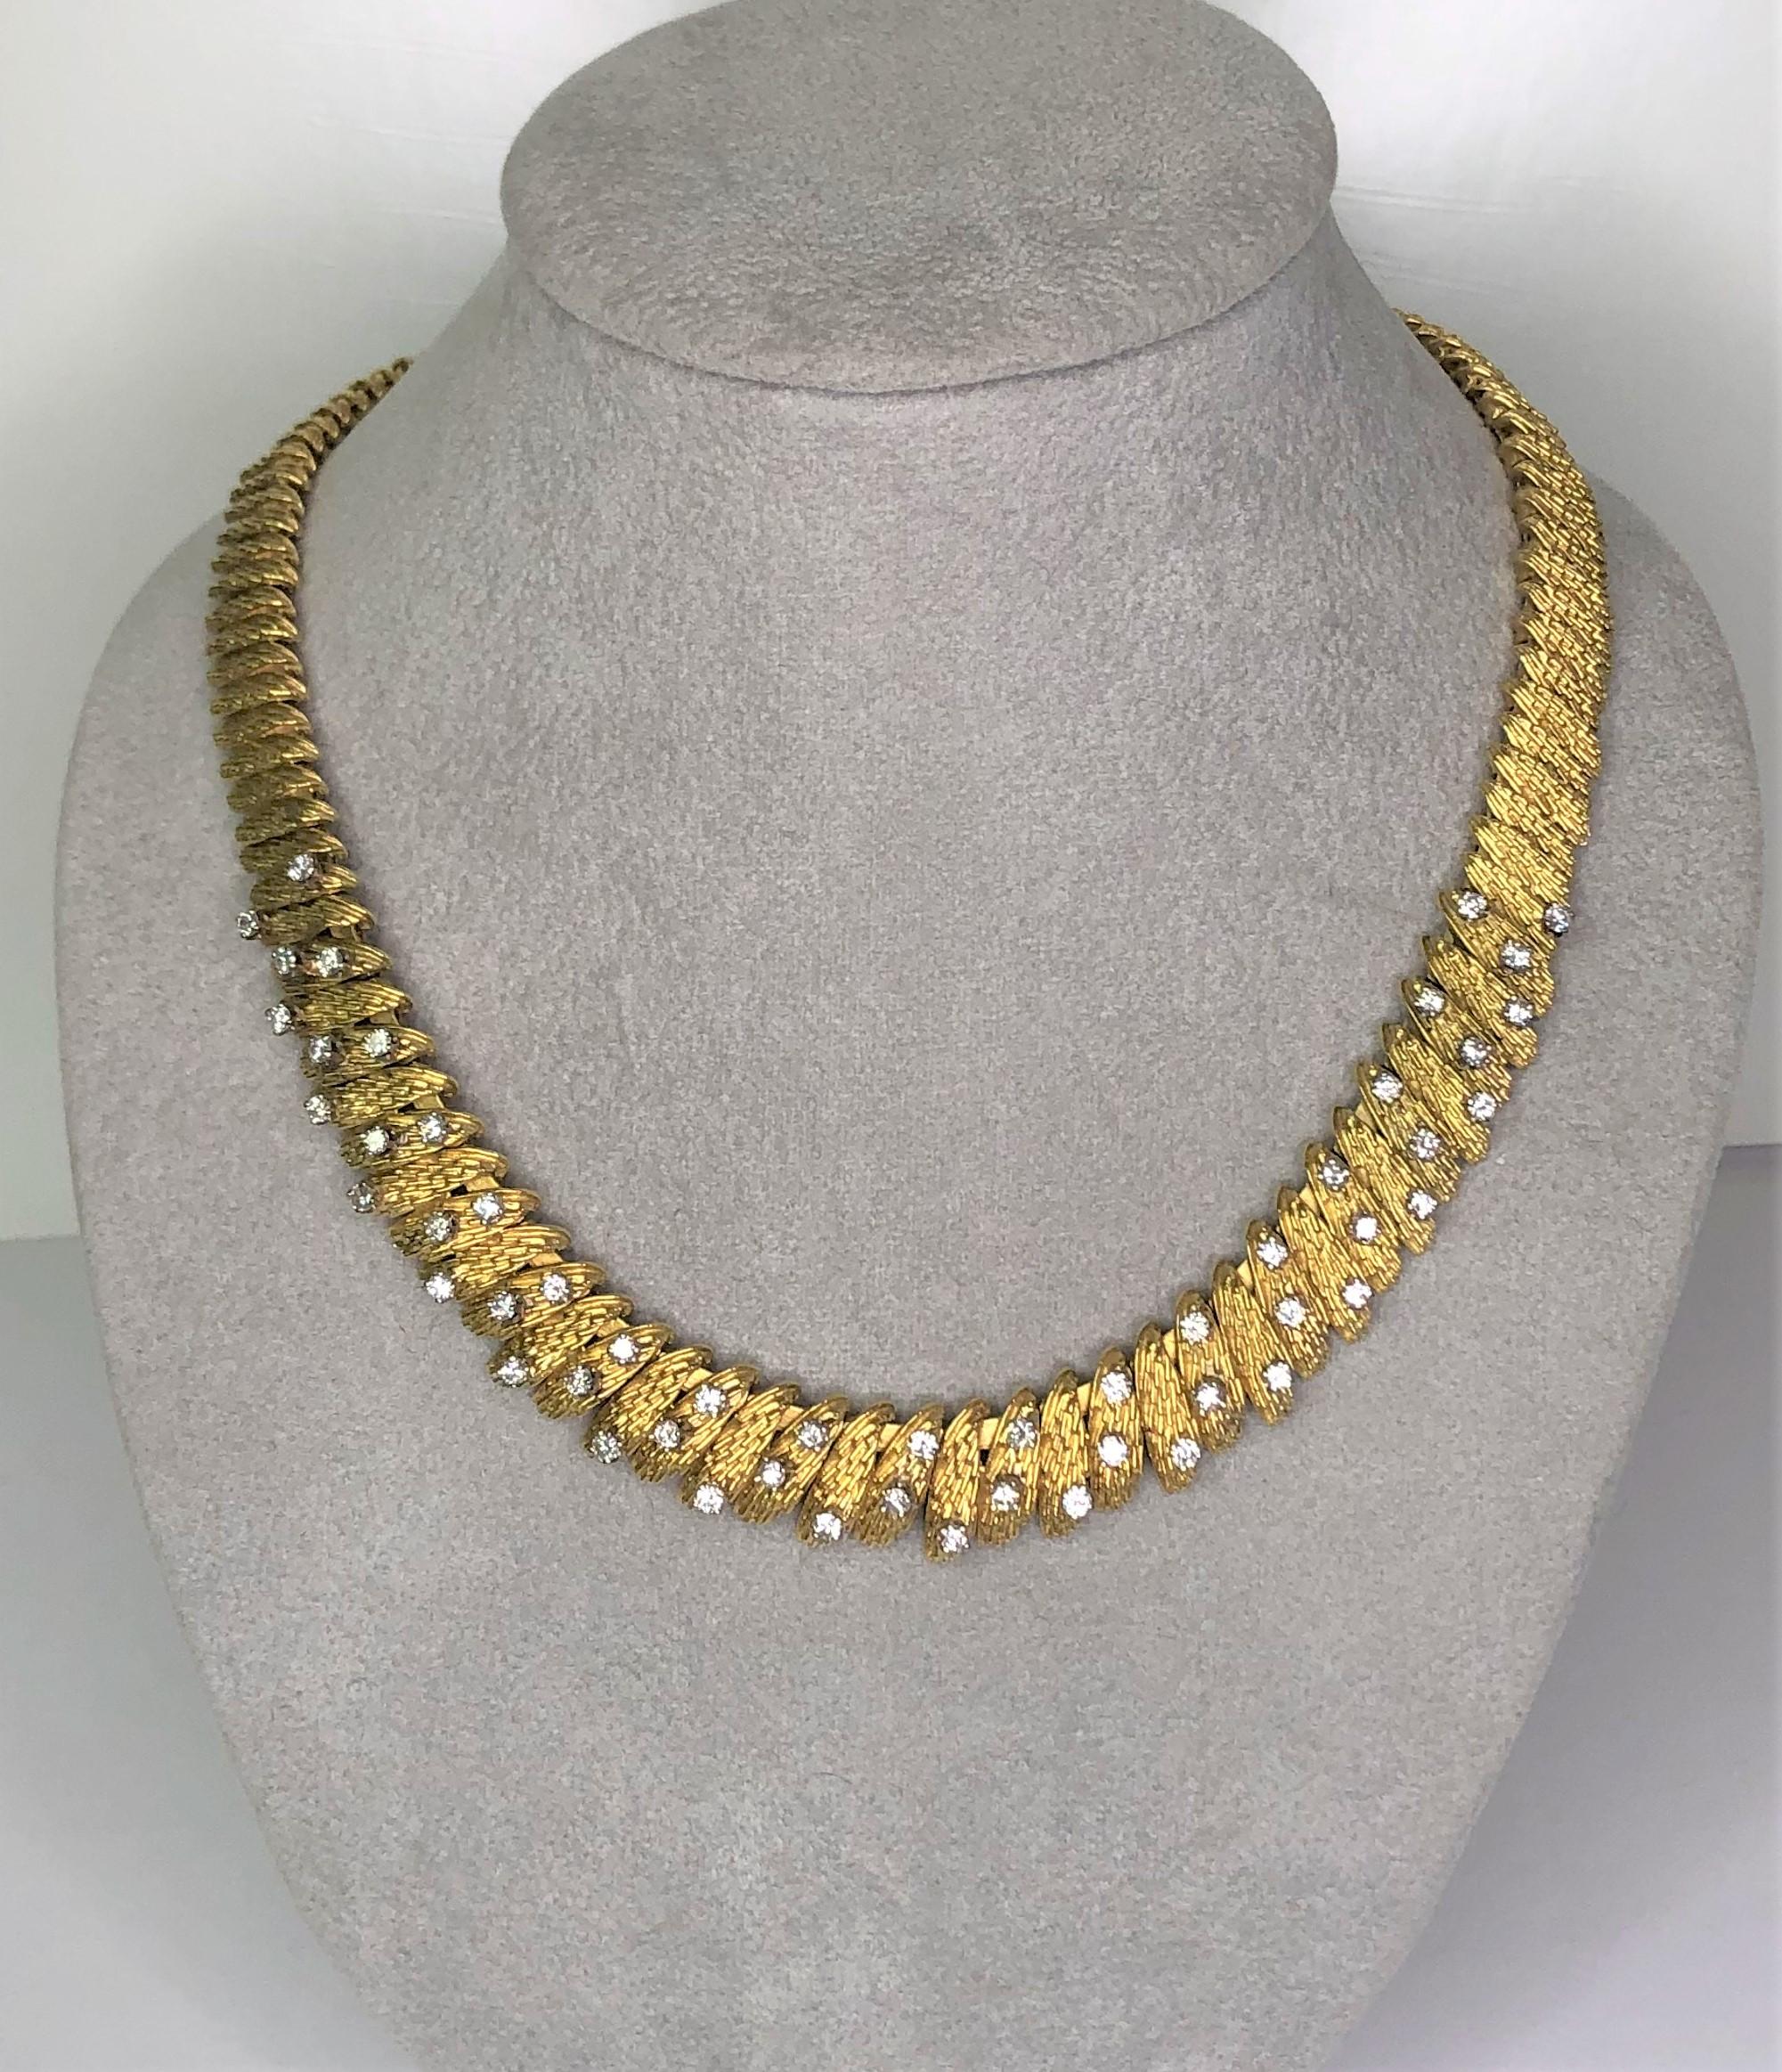 This is a one-of-a-kind item that would be a wonderful addition to anyone's jewelry collection!  
18 karat yellow gold textured design collar necklace.
53 round diamonds in a random pattern at the front of the collar.
Each diamond is approximately